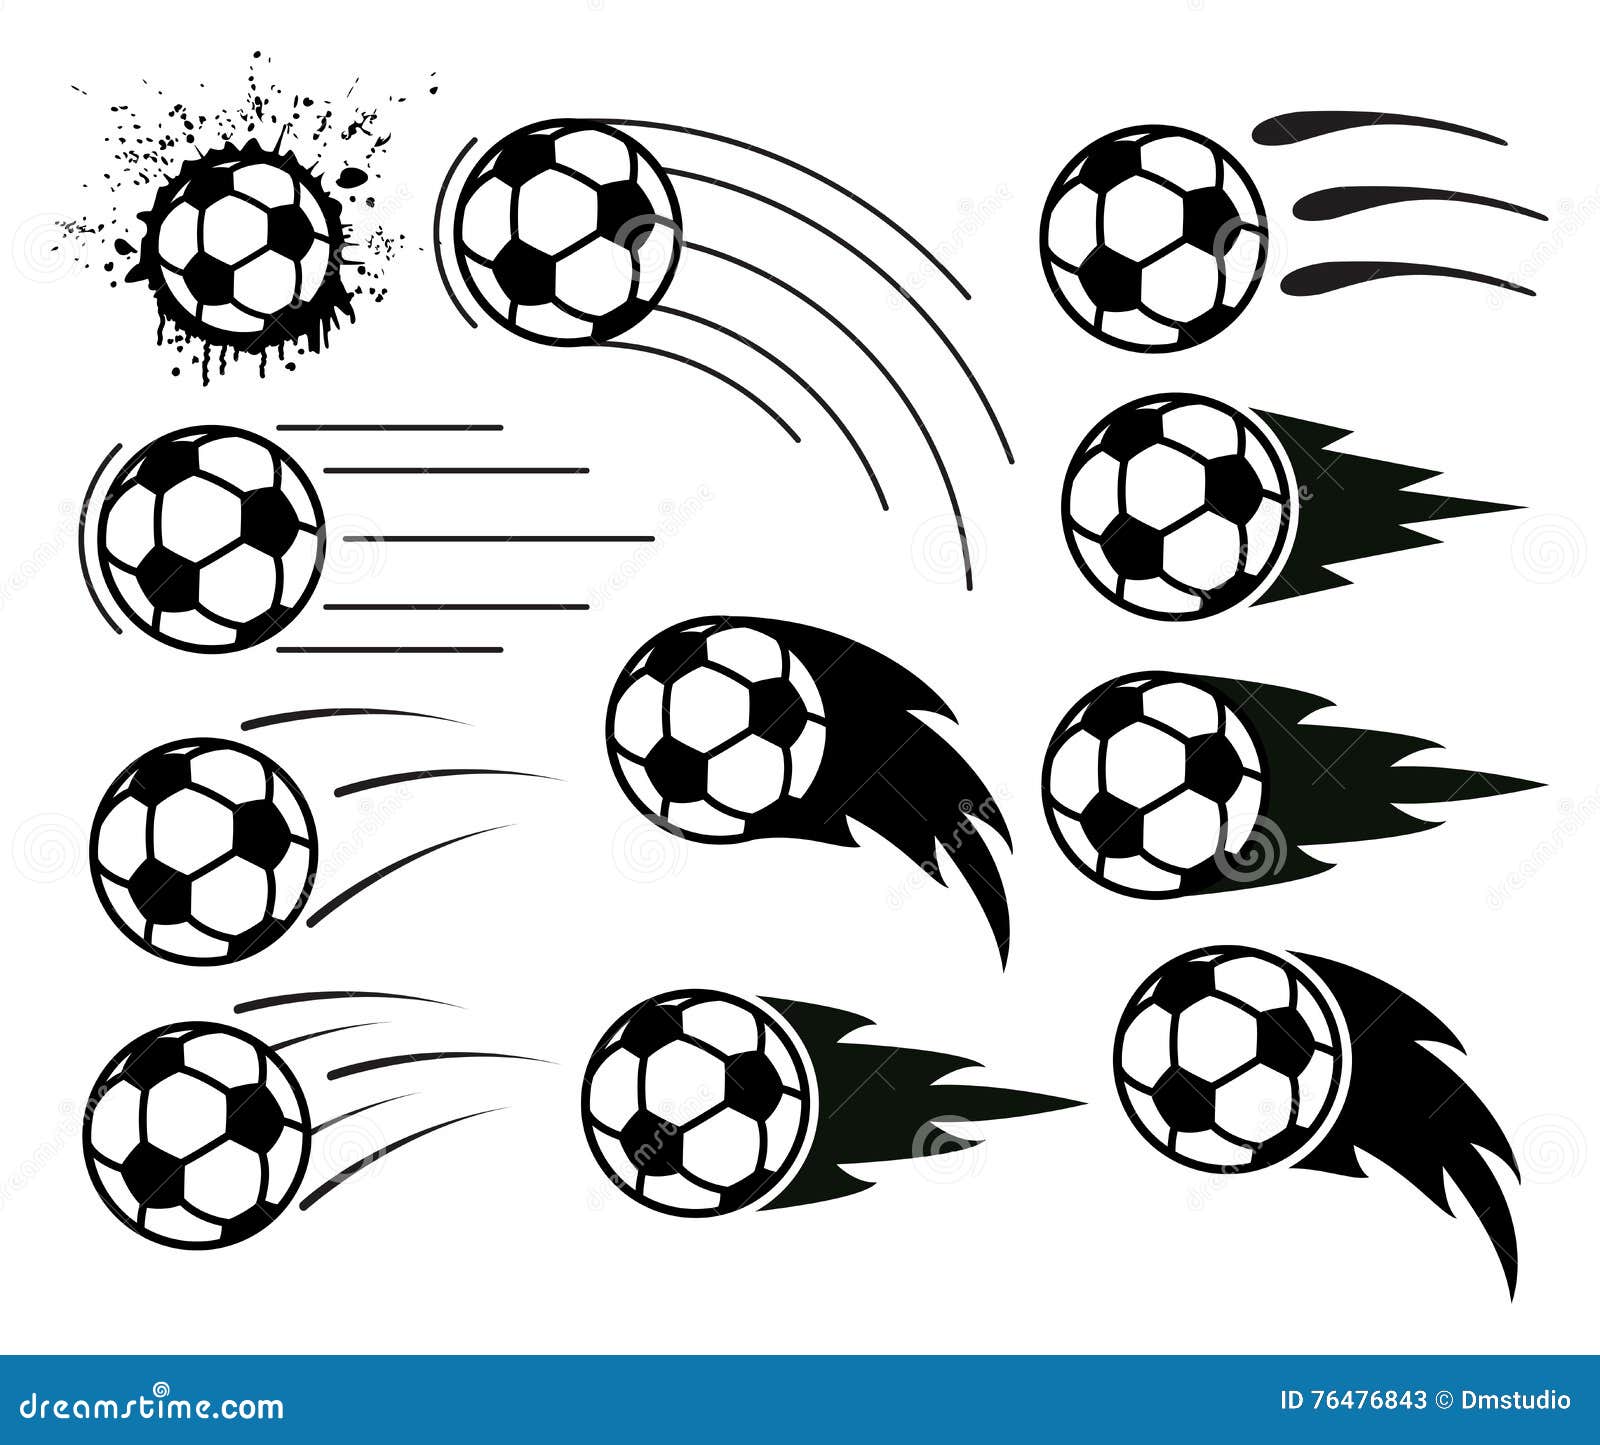 How to draw a soccer ball - step-by-step guide | Goal.com US